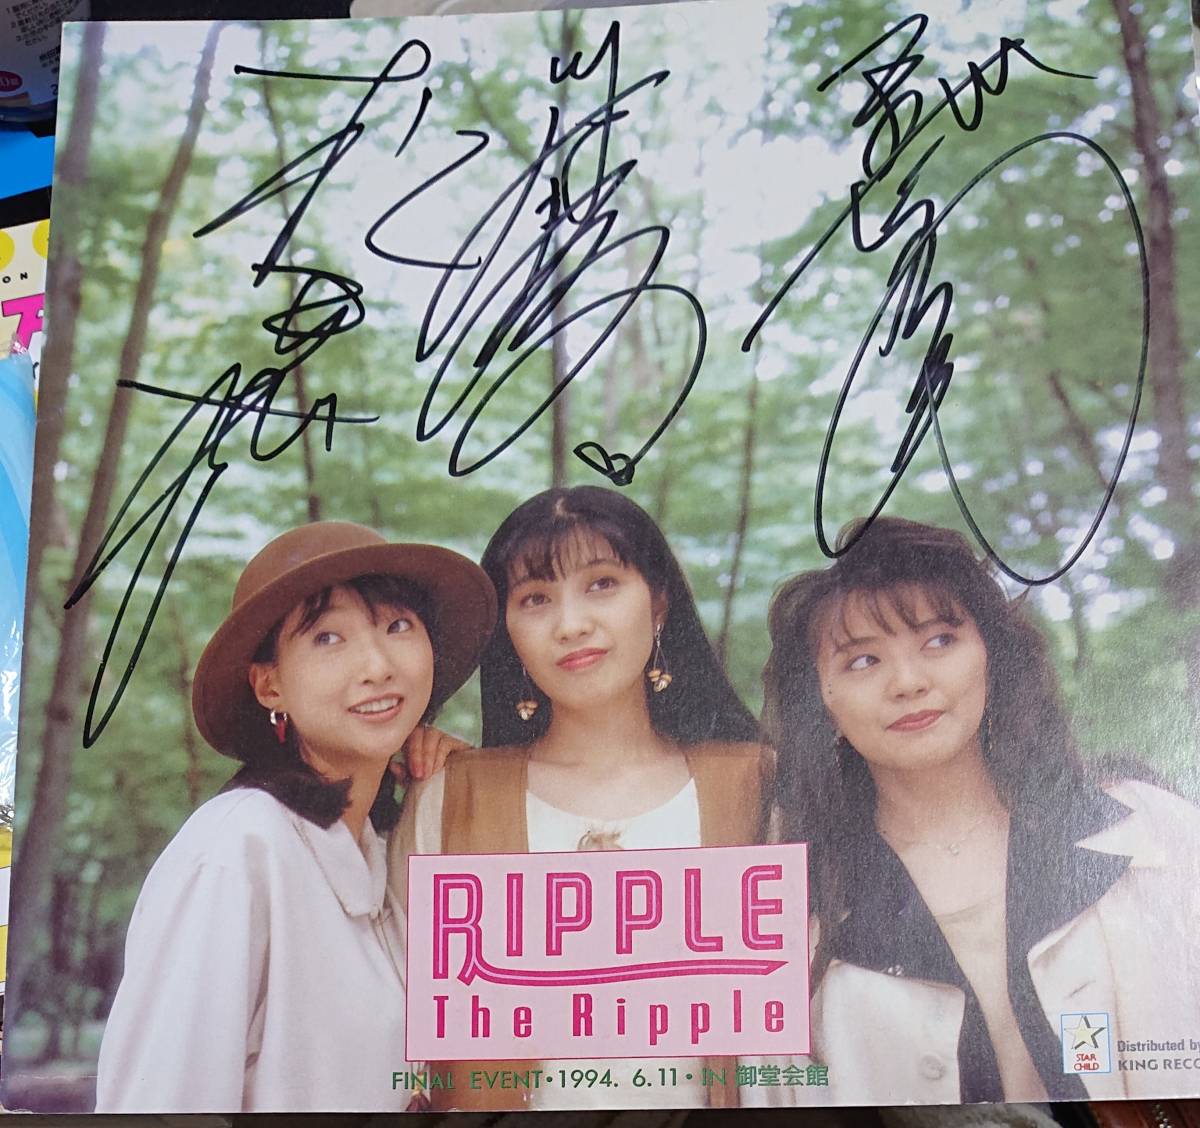 The Ripple autographed colored paper by Mari Kawamura, Chieko Honda, and Naoko Matsui. Those who can contact us within 2 days of receiving the product., Comics, Anime Goods, sign, Autograph